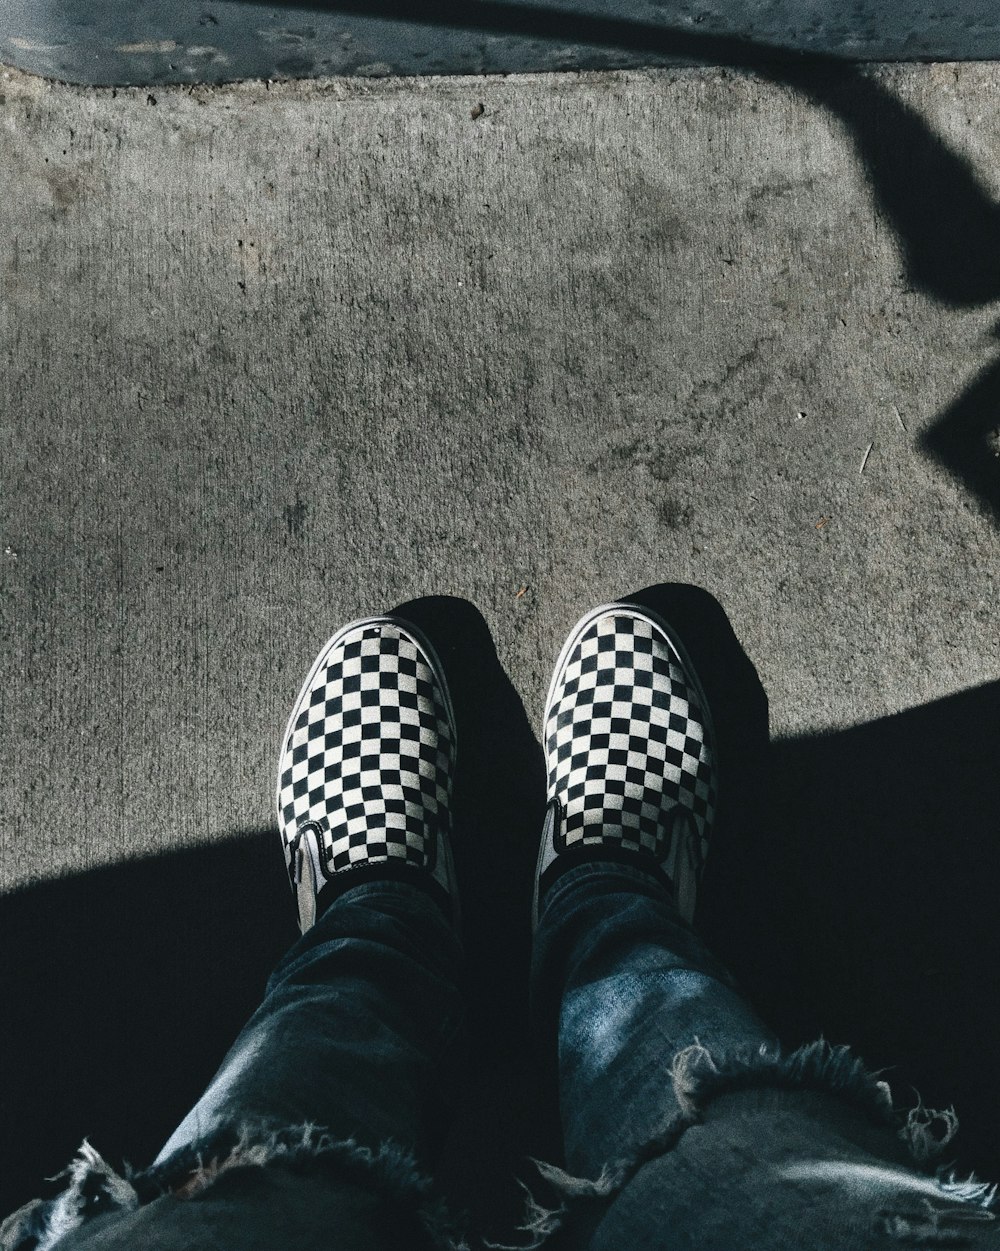 person standing while showing pair of black-and-white checkered shoes